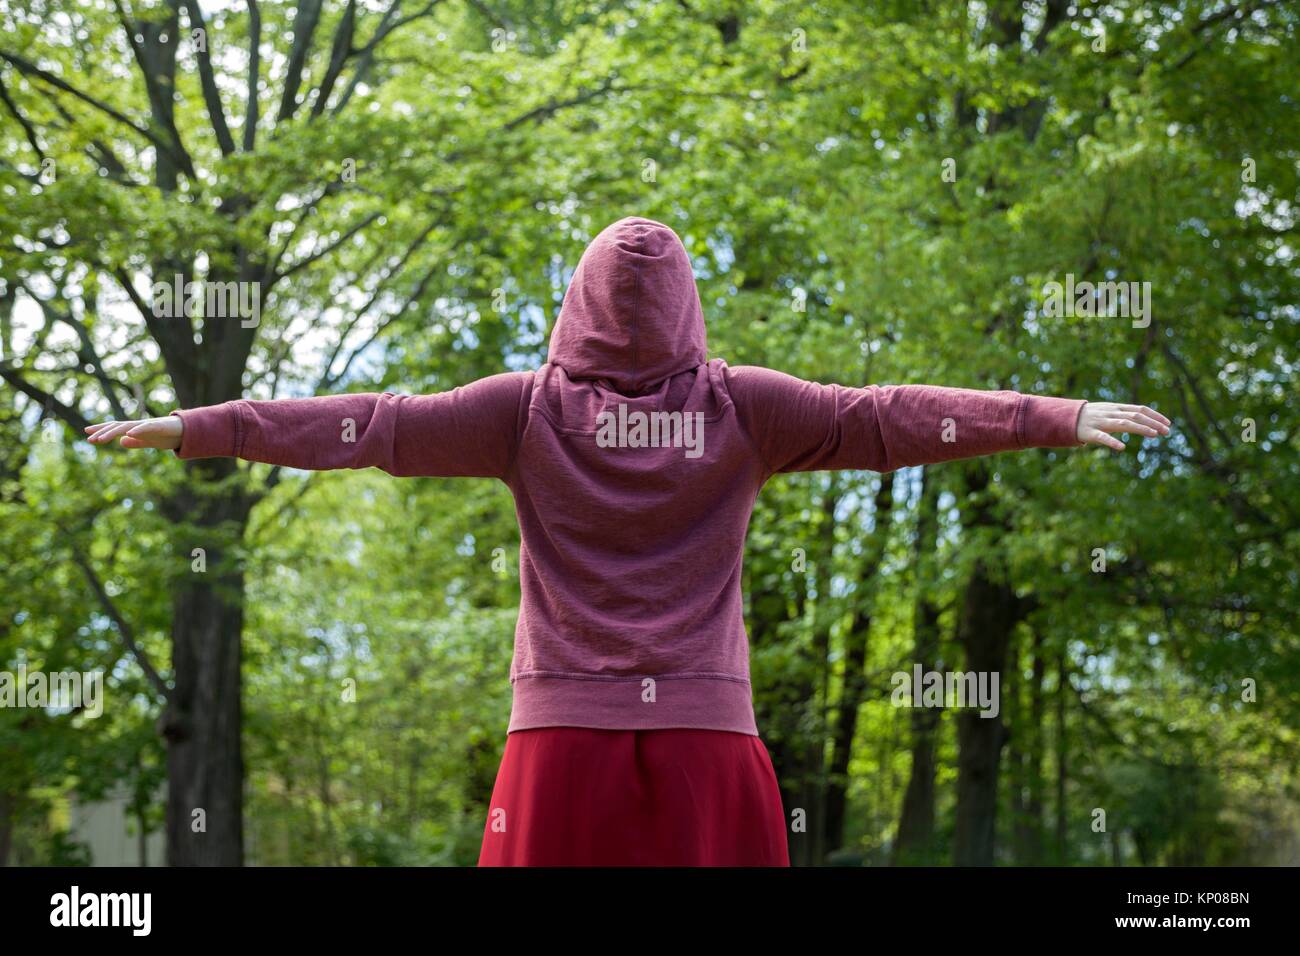 Girl in the Woods - When She Roams She Glows Hoodie – Crowdmade